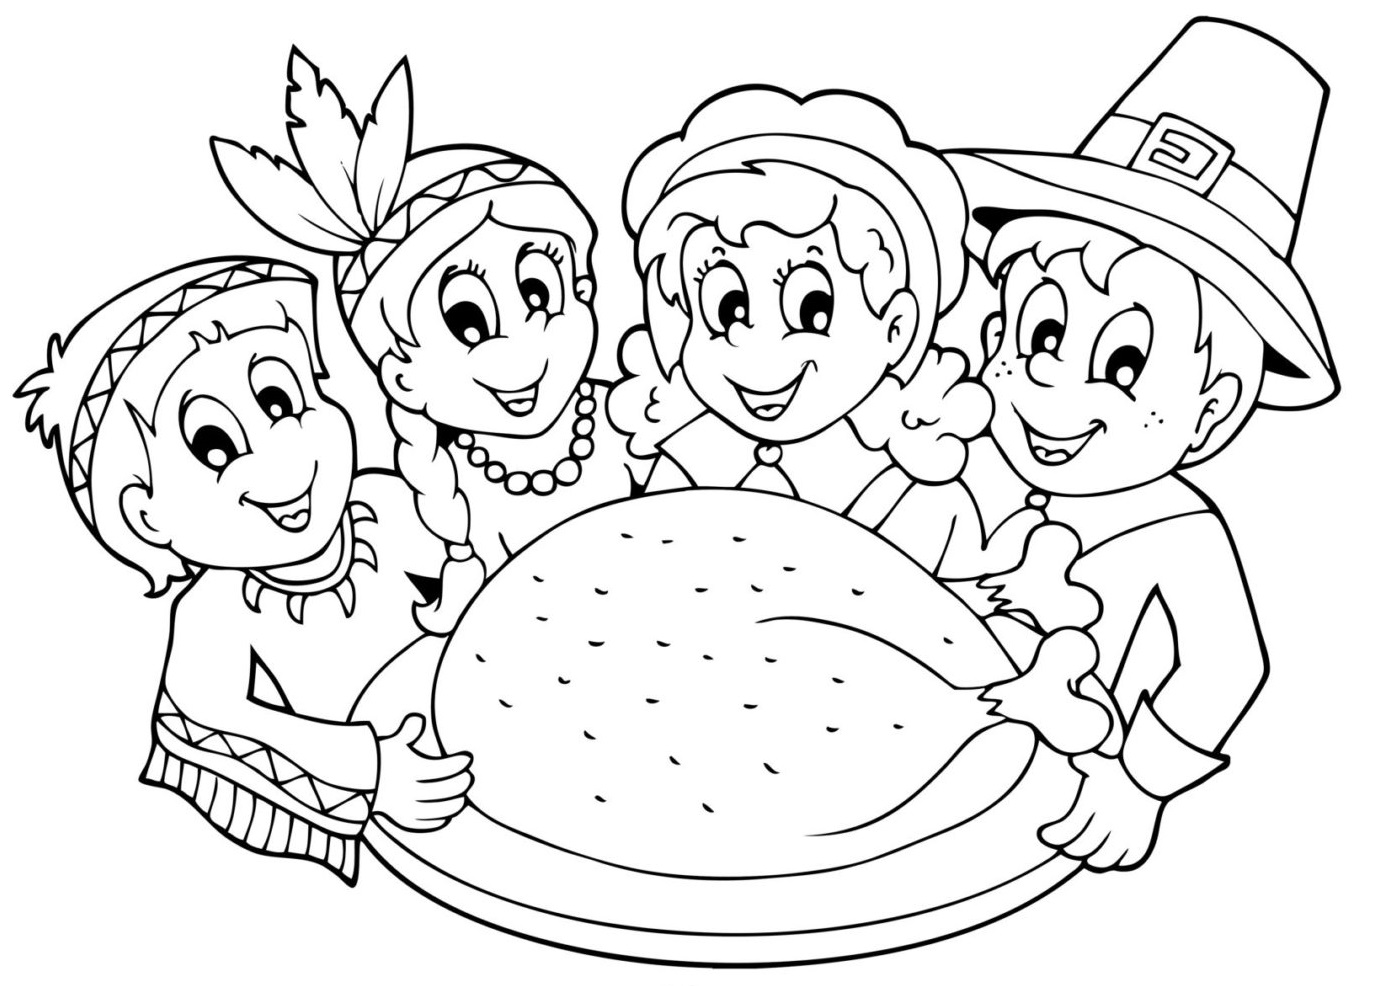 Thanksgiving With Family And Kids Coloring Page